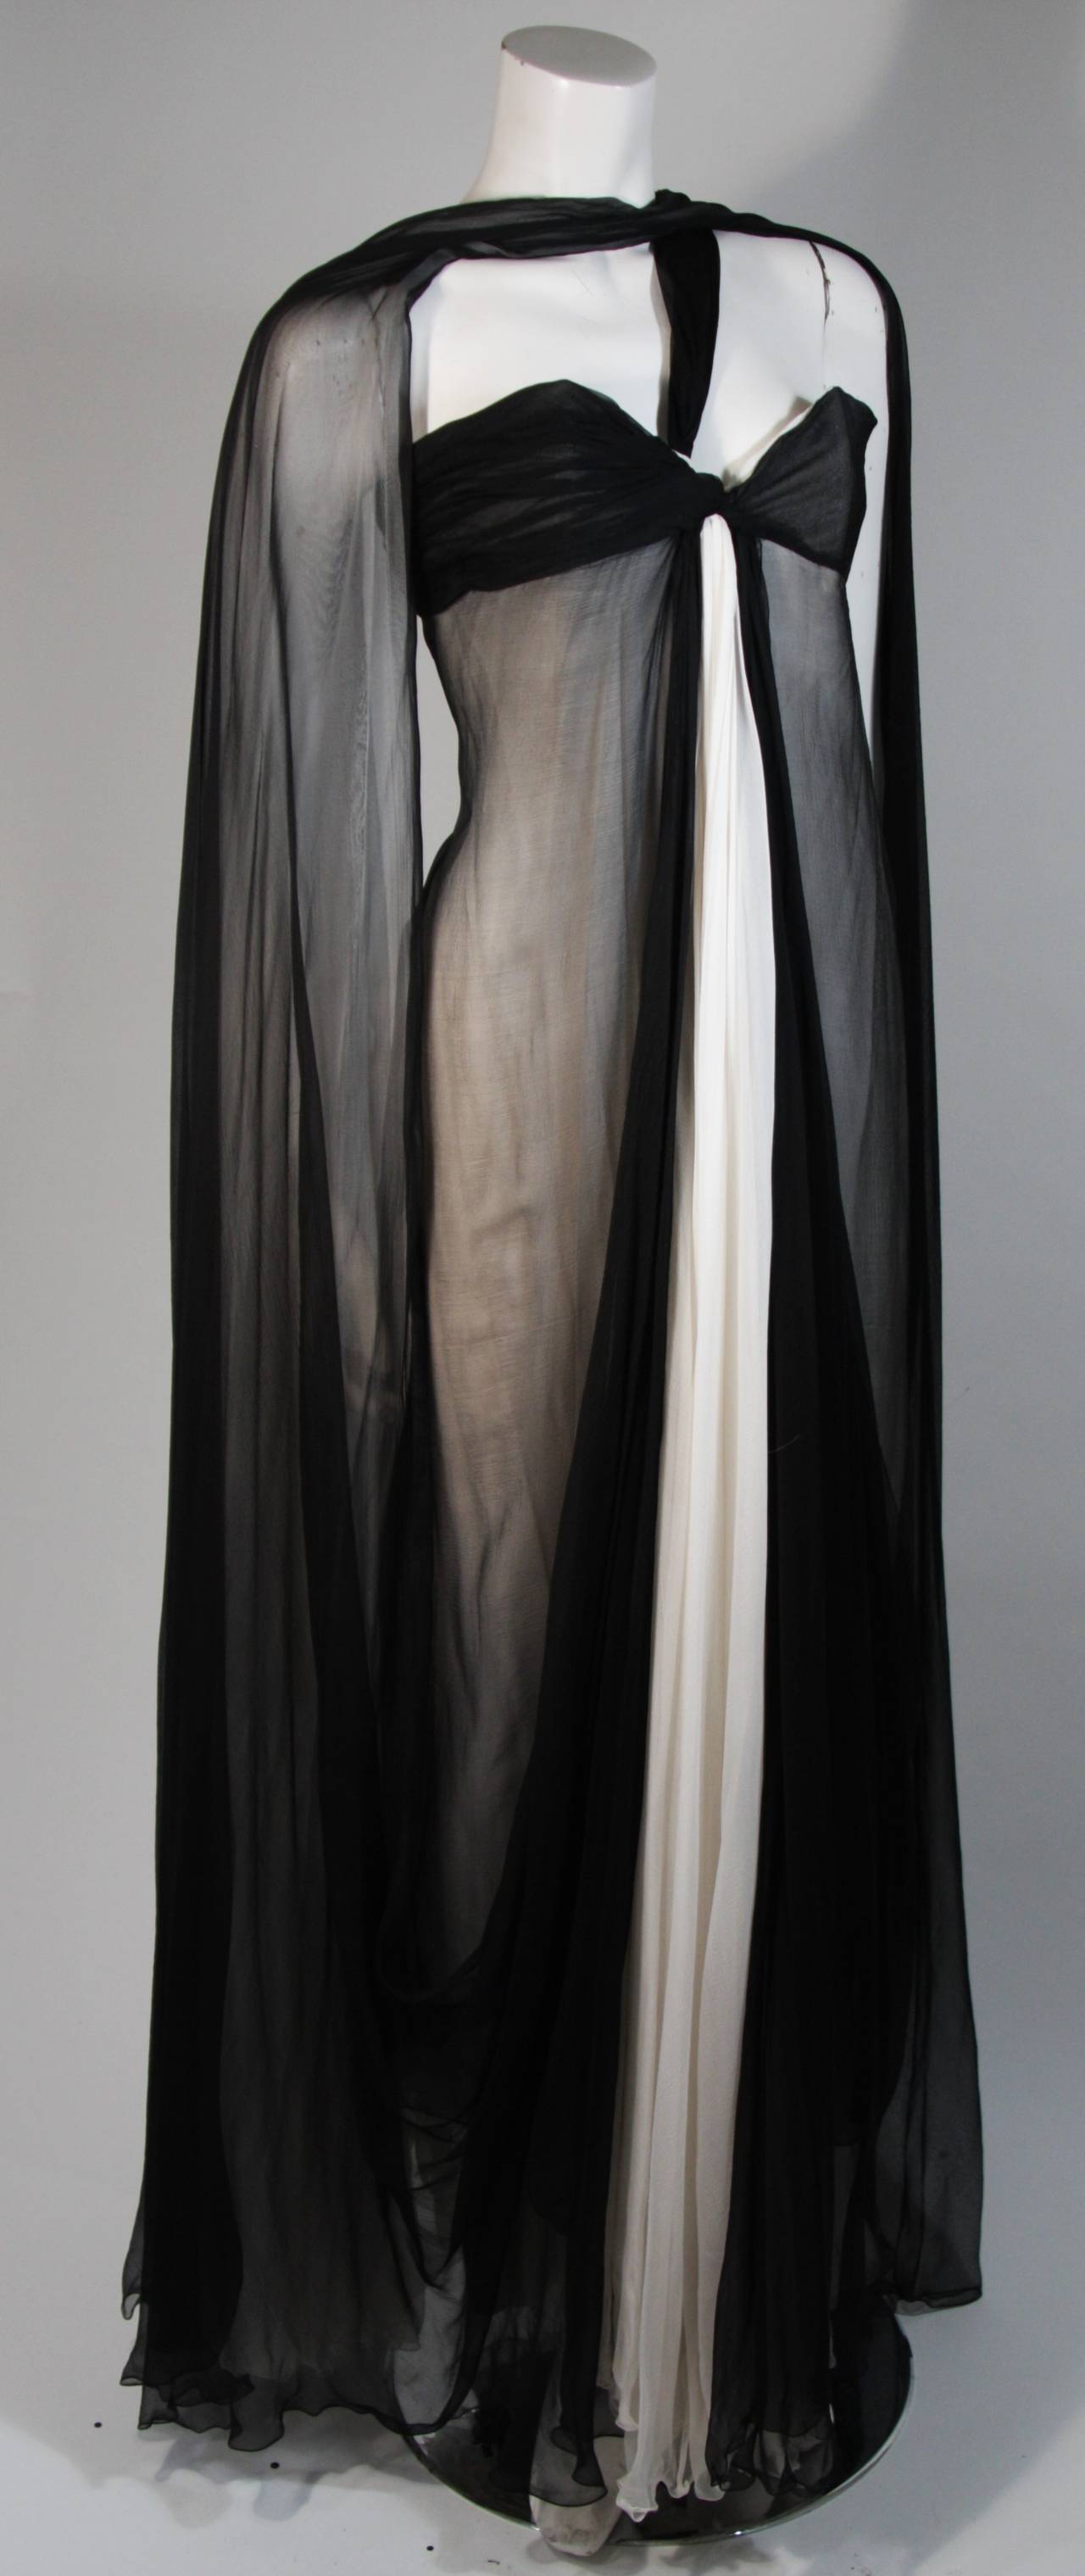 Jacqueline De Ribes Black and Ivory Silk Chiffon Gown Size In Excellent Condition For Sale In Los Angeles, CA